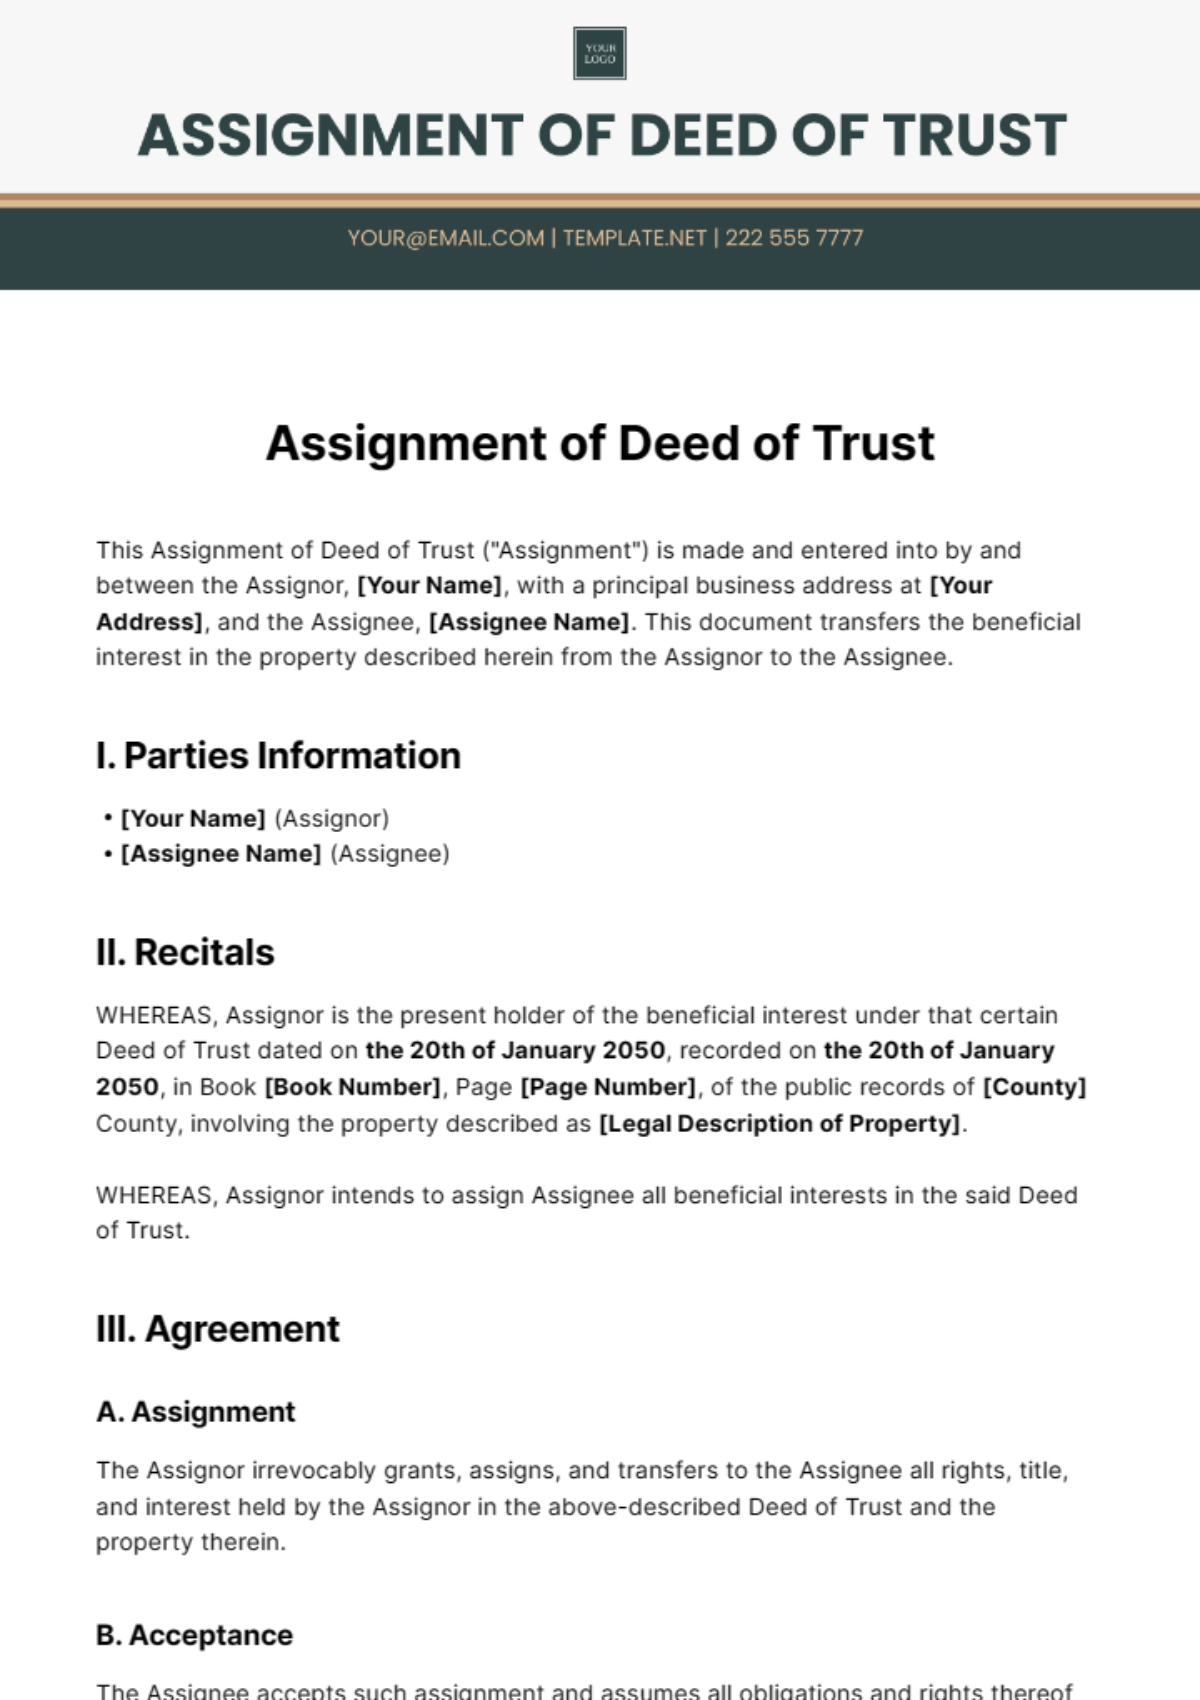 Free Assignment of Deed of Trust Template